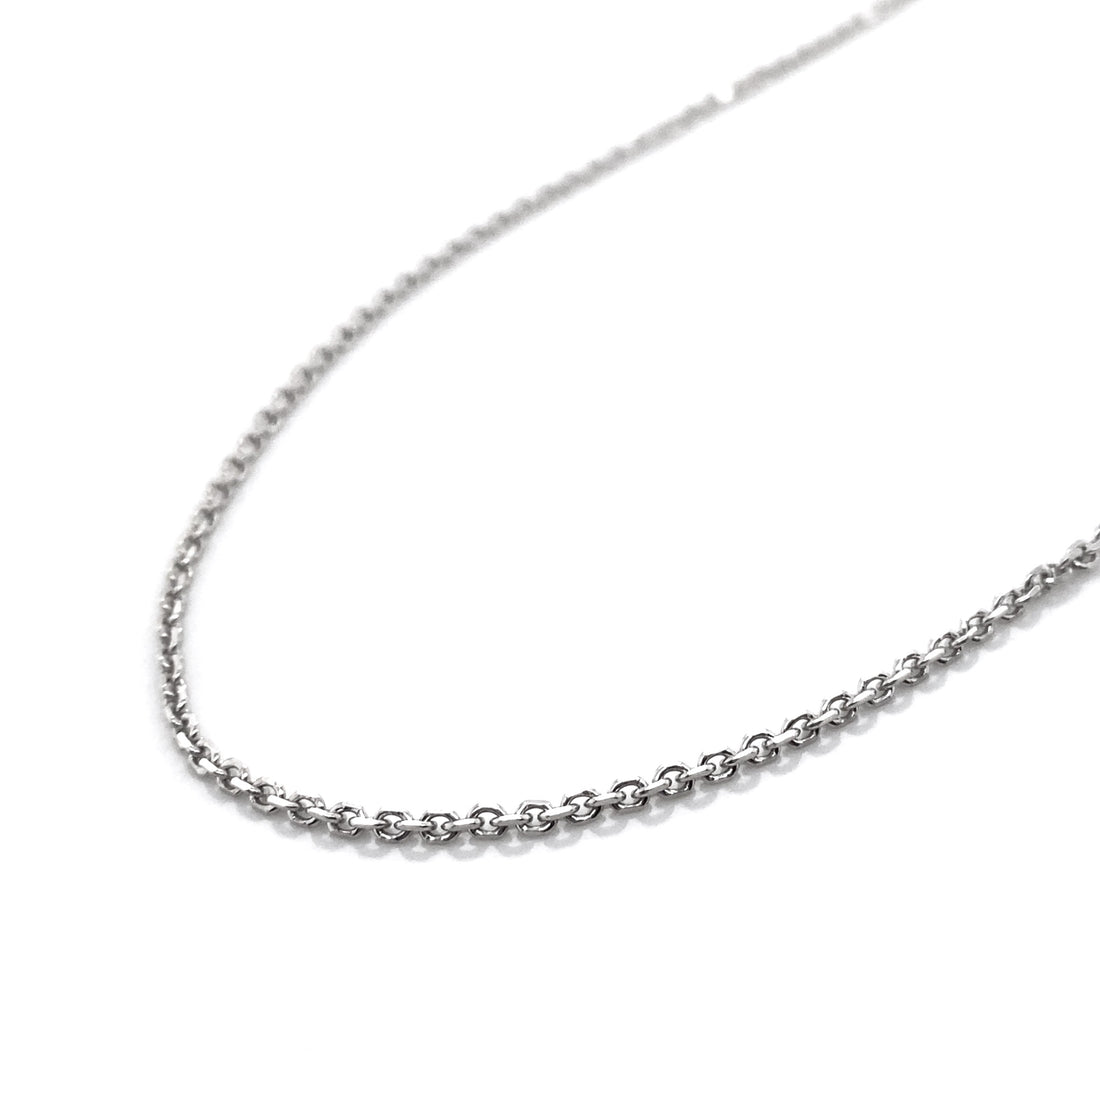 Silver 22" Adjustable Cable Chain